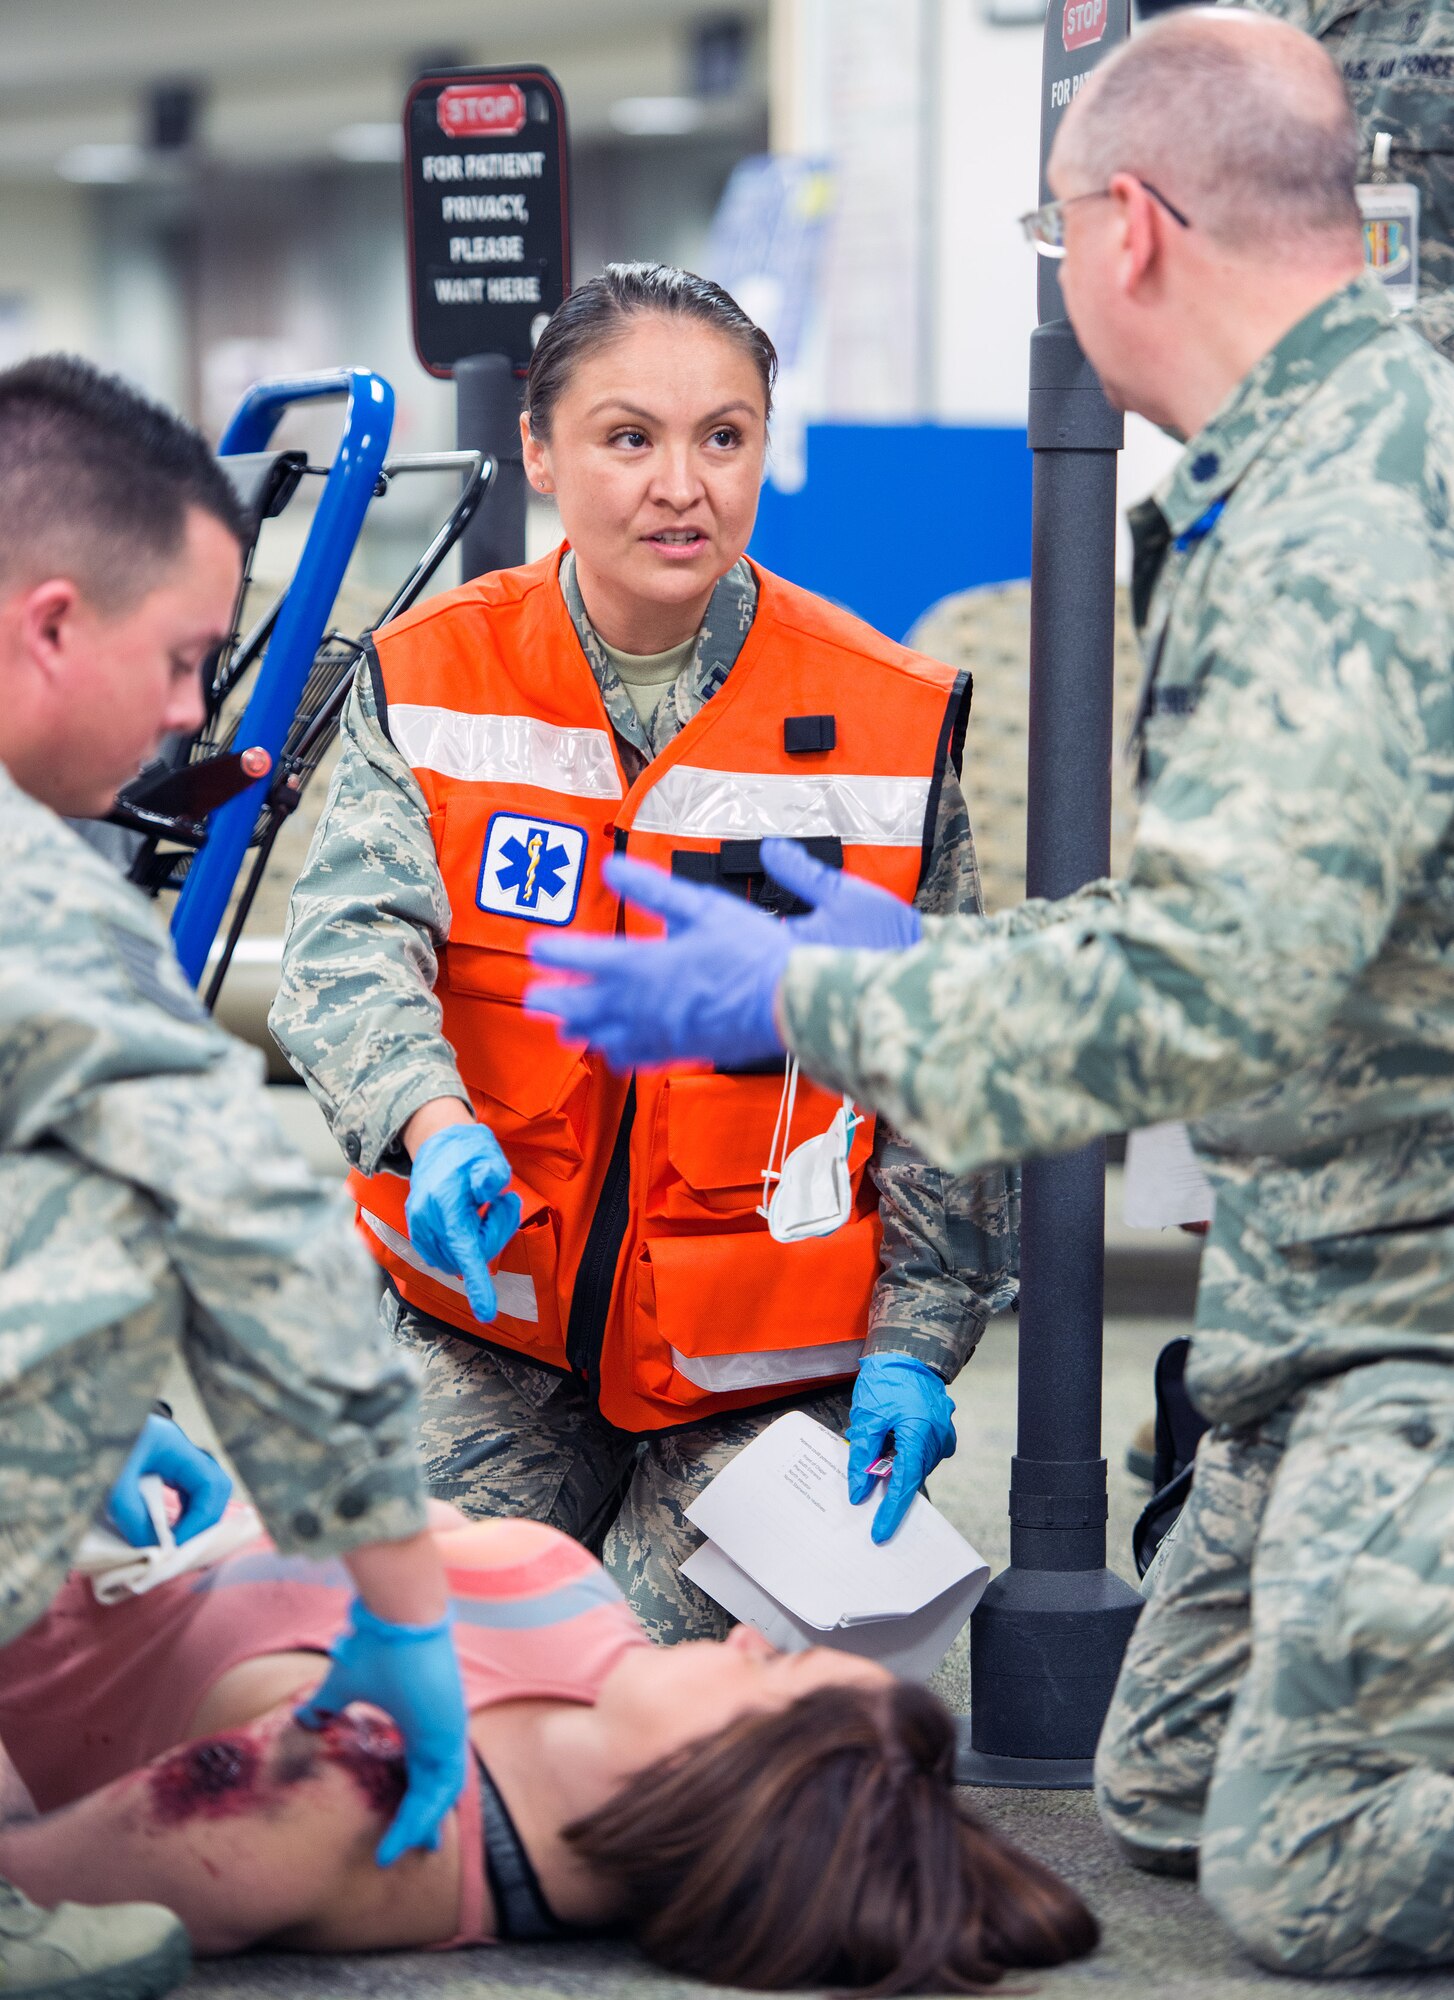 Service members from David Grant USAF Medical Center participate in an active shooter exercise at Travis Air Force Base, Calif., Jan. 26, 2017. The exercise evaluated the medical staff’s lock down response and patient care procedures. (U.S. Air Force photo/Louis Briscese)